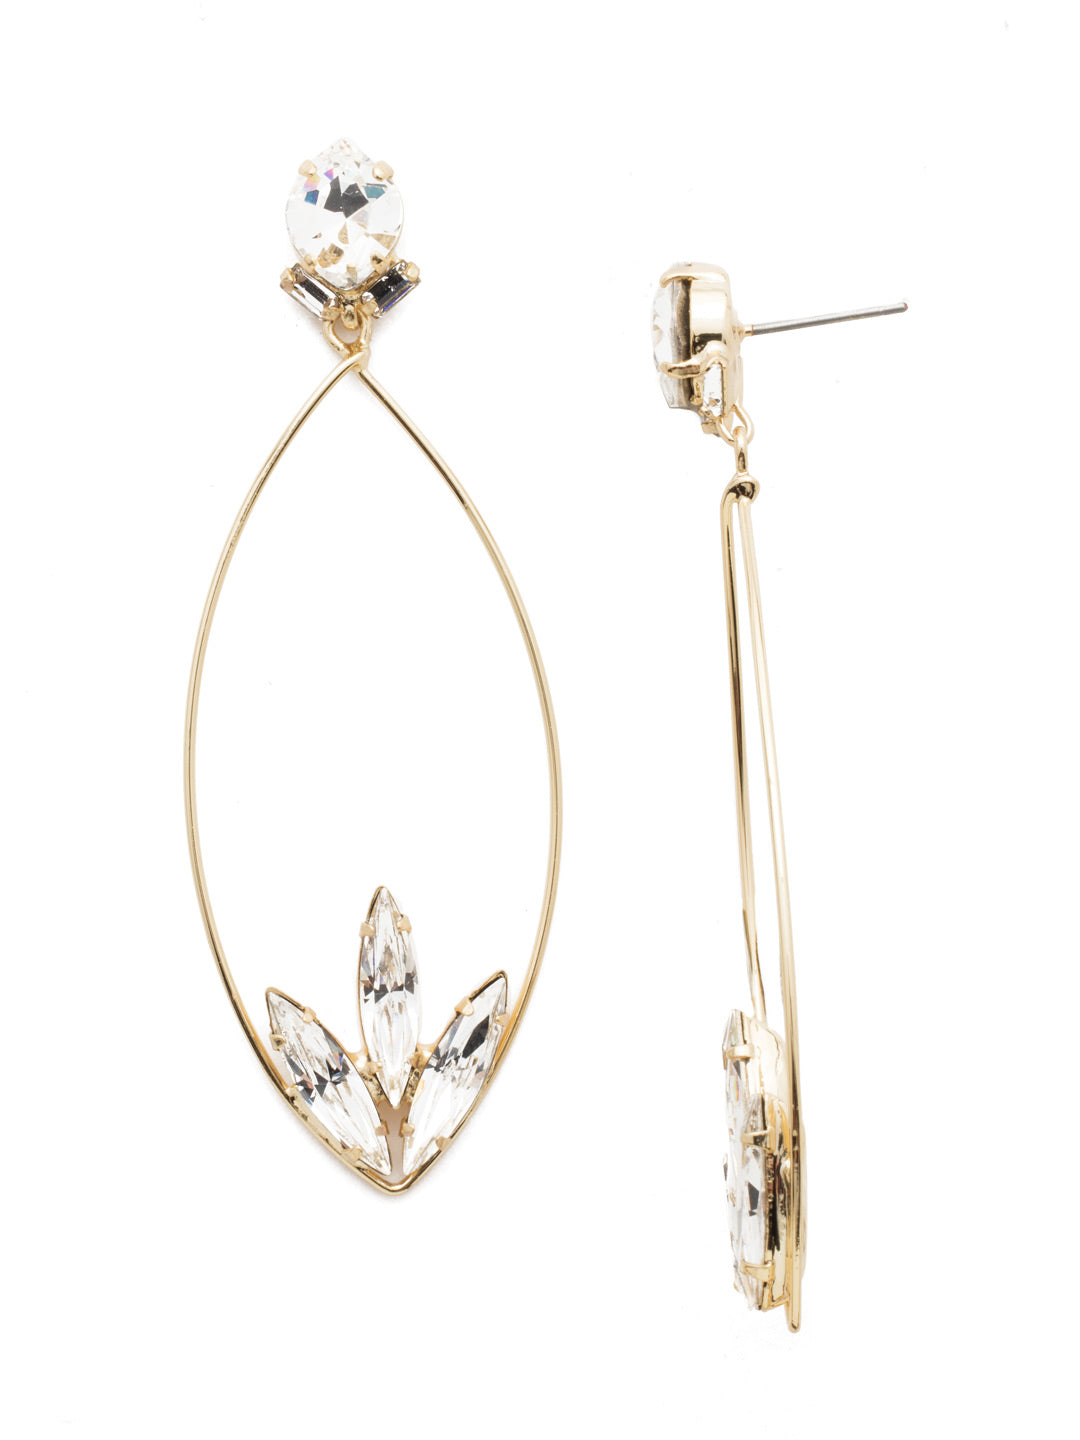 Esmeralda Statement Earring - 4EEN16BGCRY - <p>Looking for a standout hoop style? Get it in our Esmeralda Statement Hoop Earrings. Their unique teardrop shape pairs perfectly with the trio of navette crystals. From Sorrelli's Crystal collection in our Bright Gold-tone finish.</p>